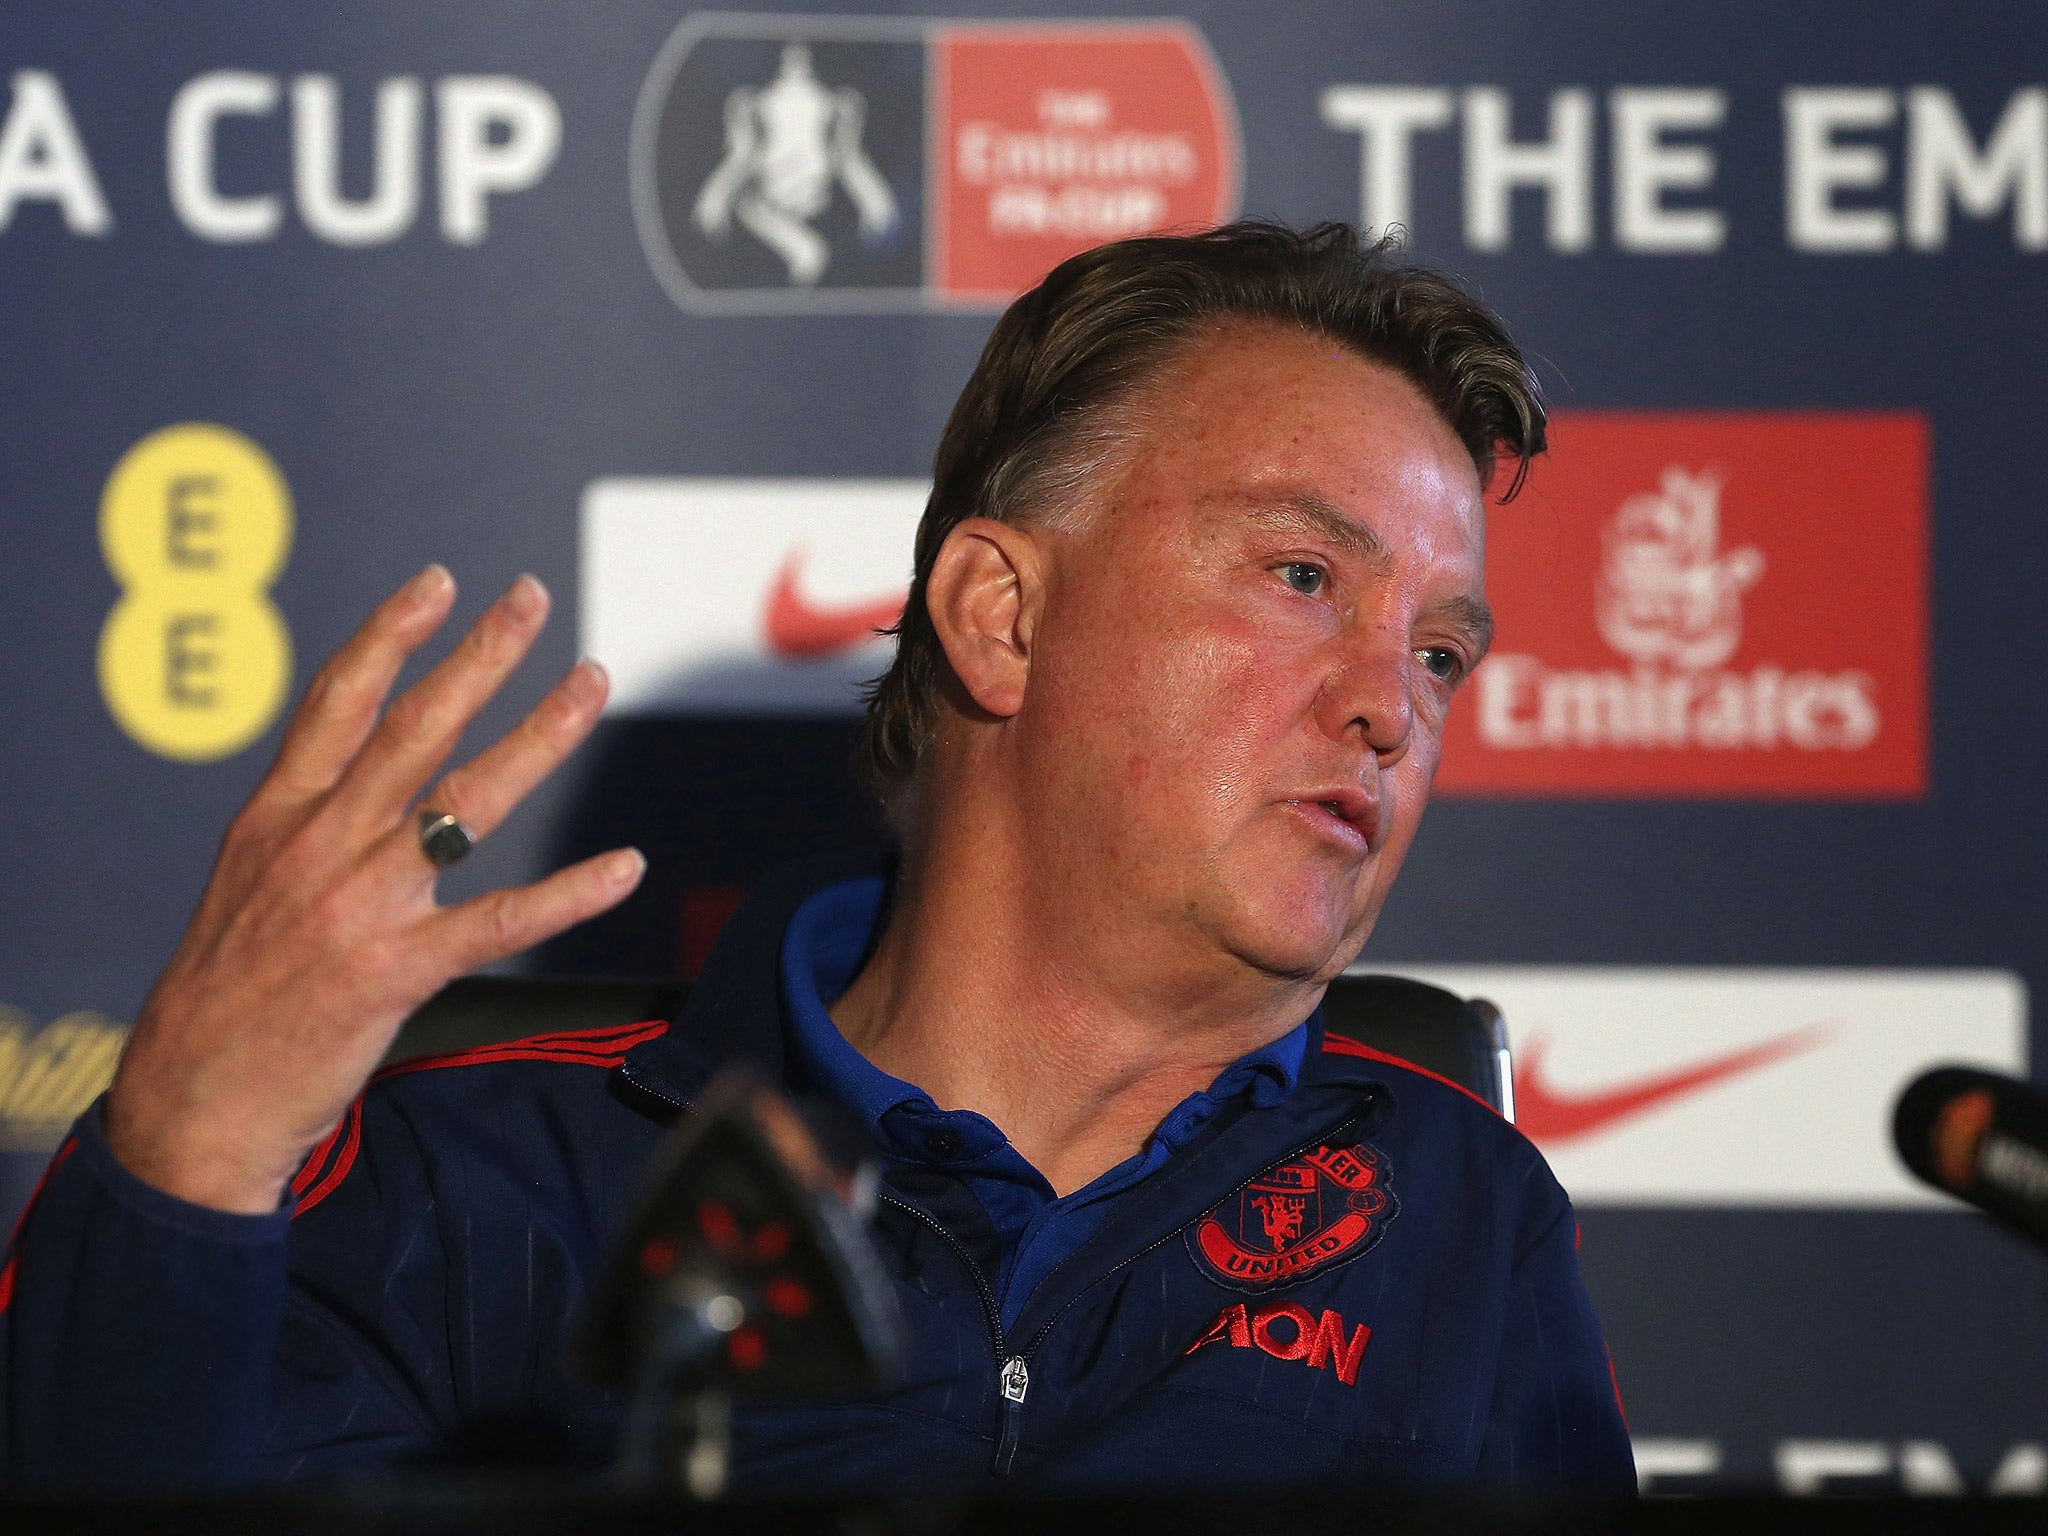 Louis van Gaal wants Manchester United to win the FA Cup final 'beautifully'